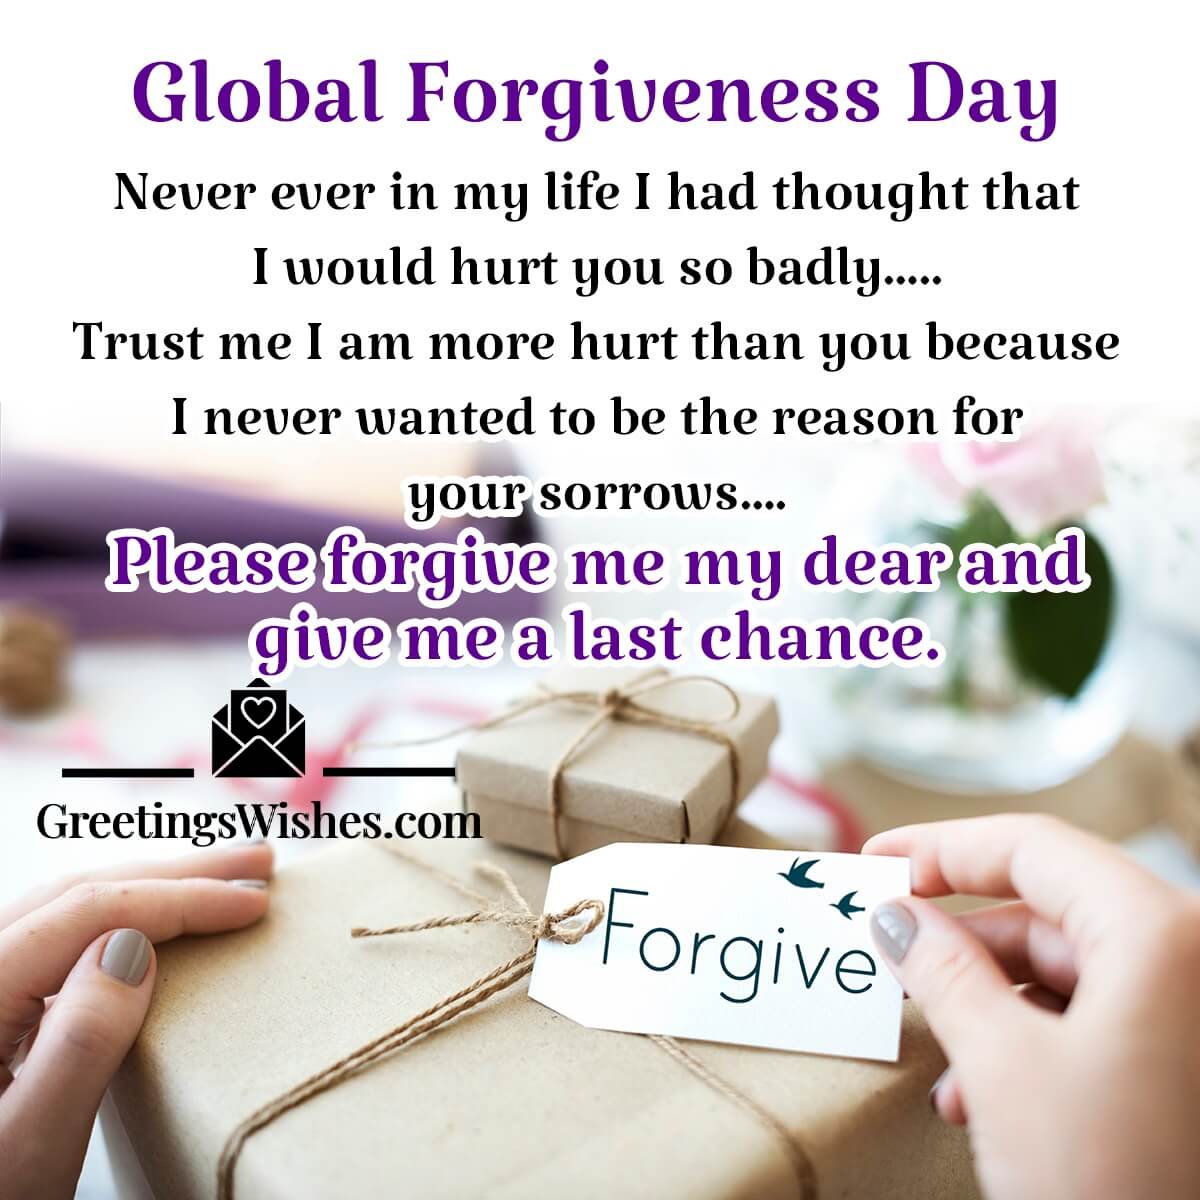 Global Forgiveness Day Message